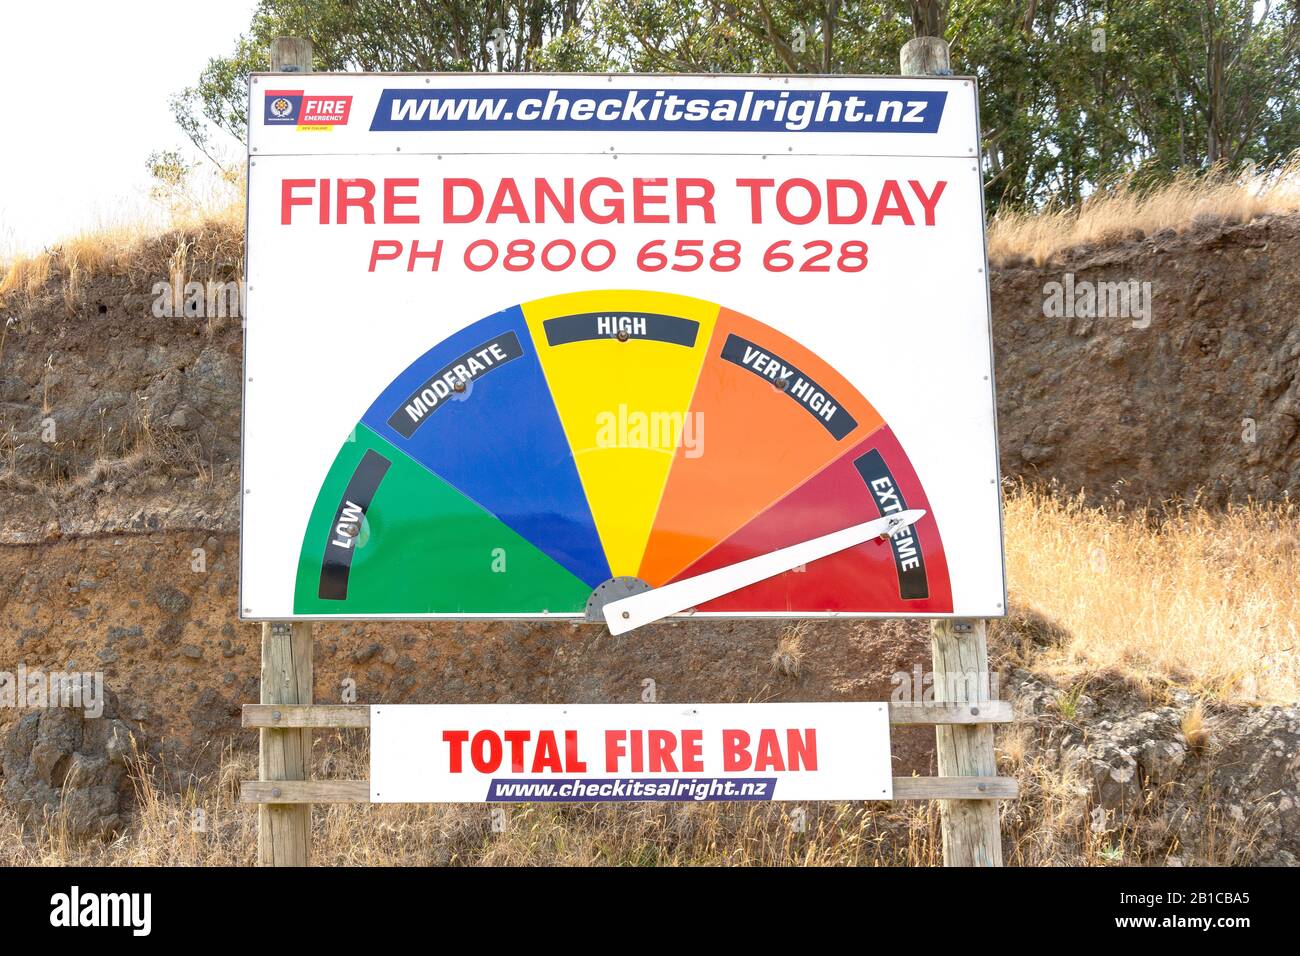 Extreme setting on fire danger sign, Sumner Road, Sumner, Christchurch, Canterbury Region, New Zealand Stock Photo